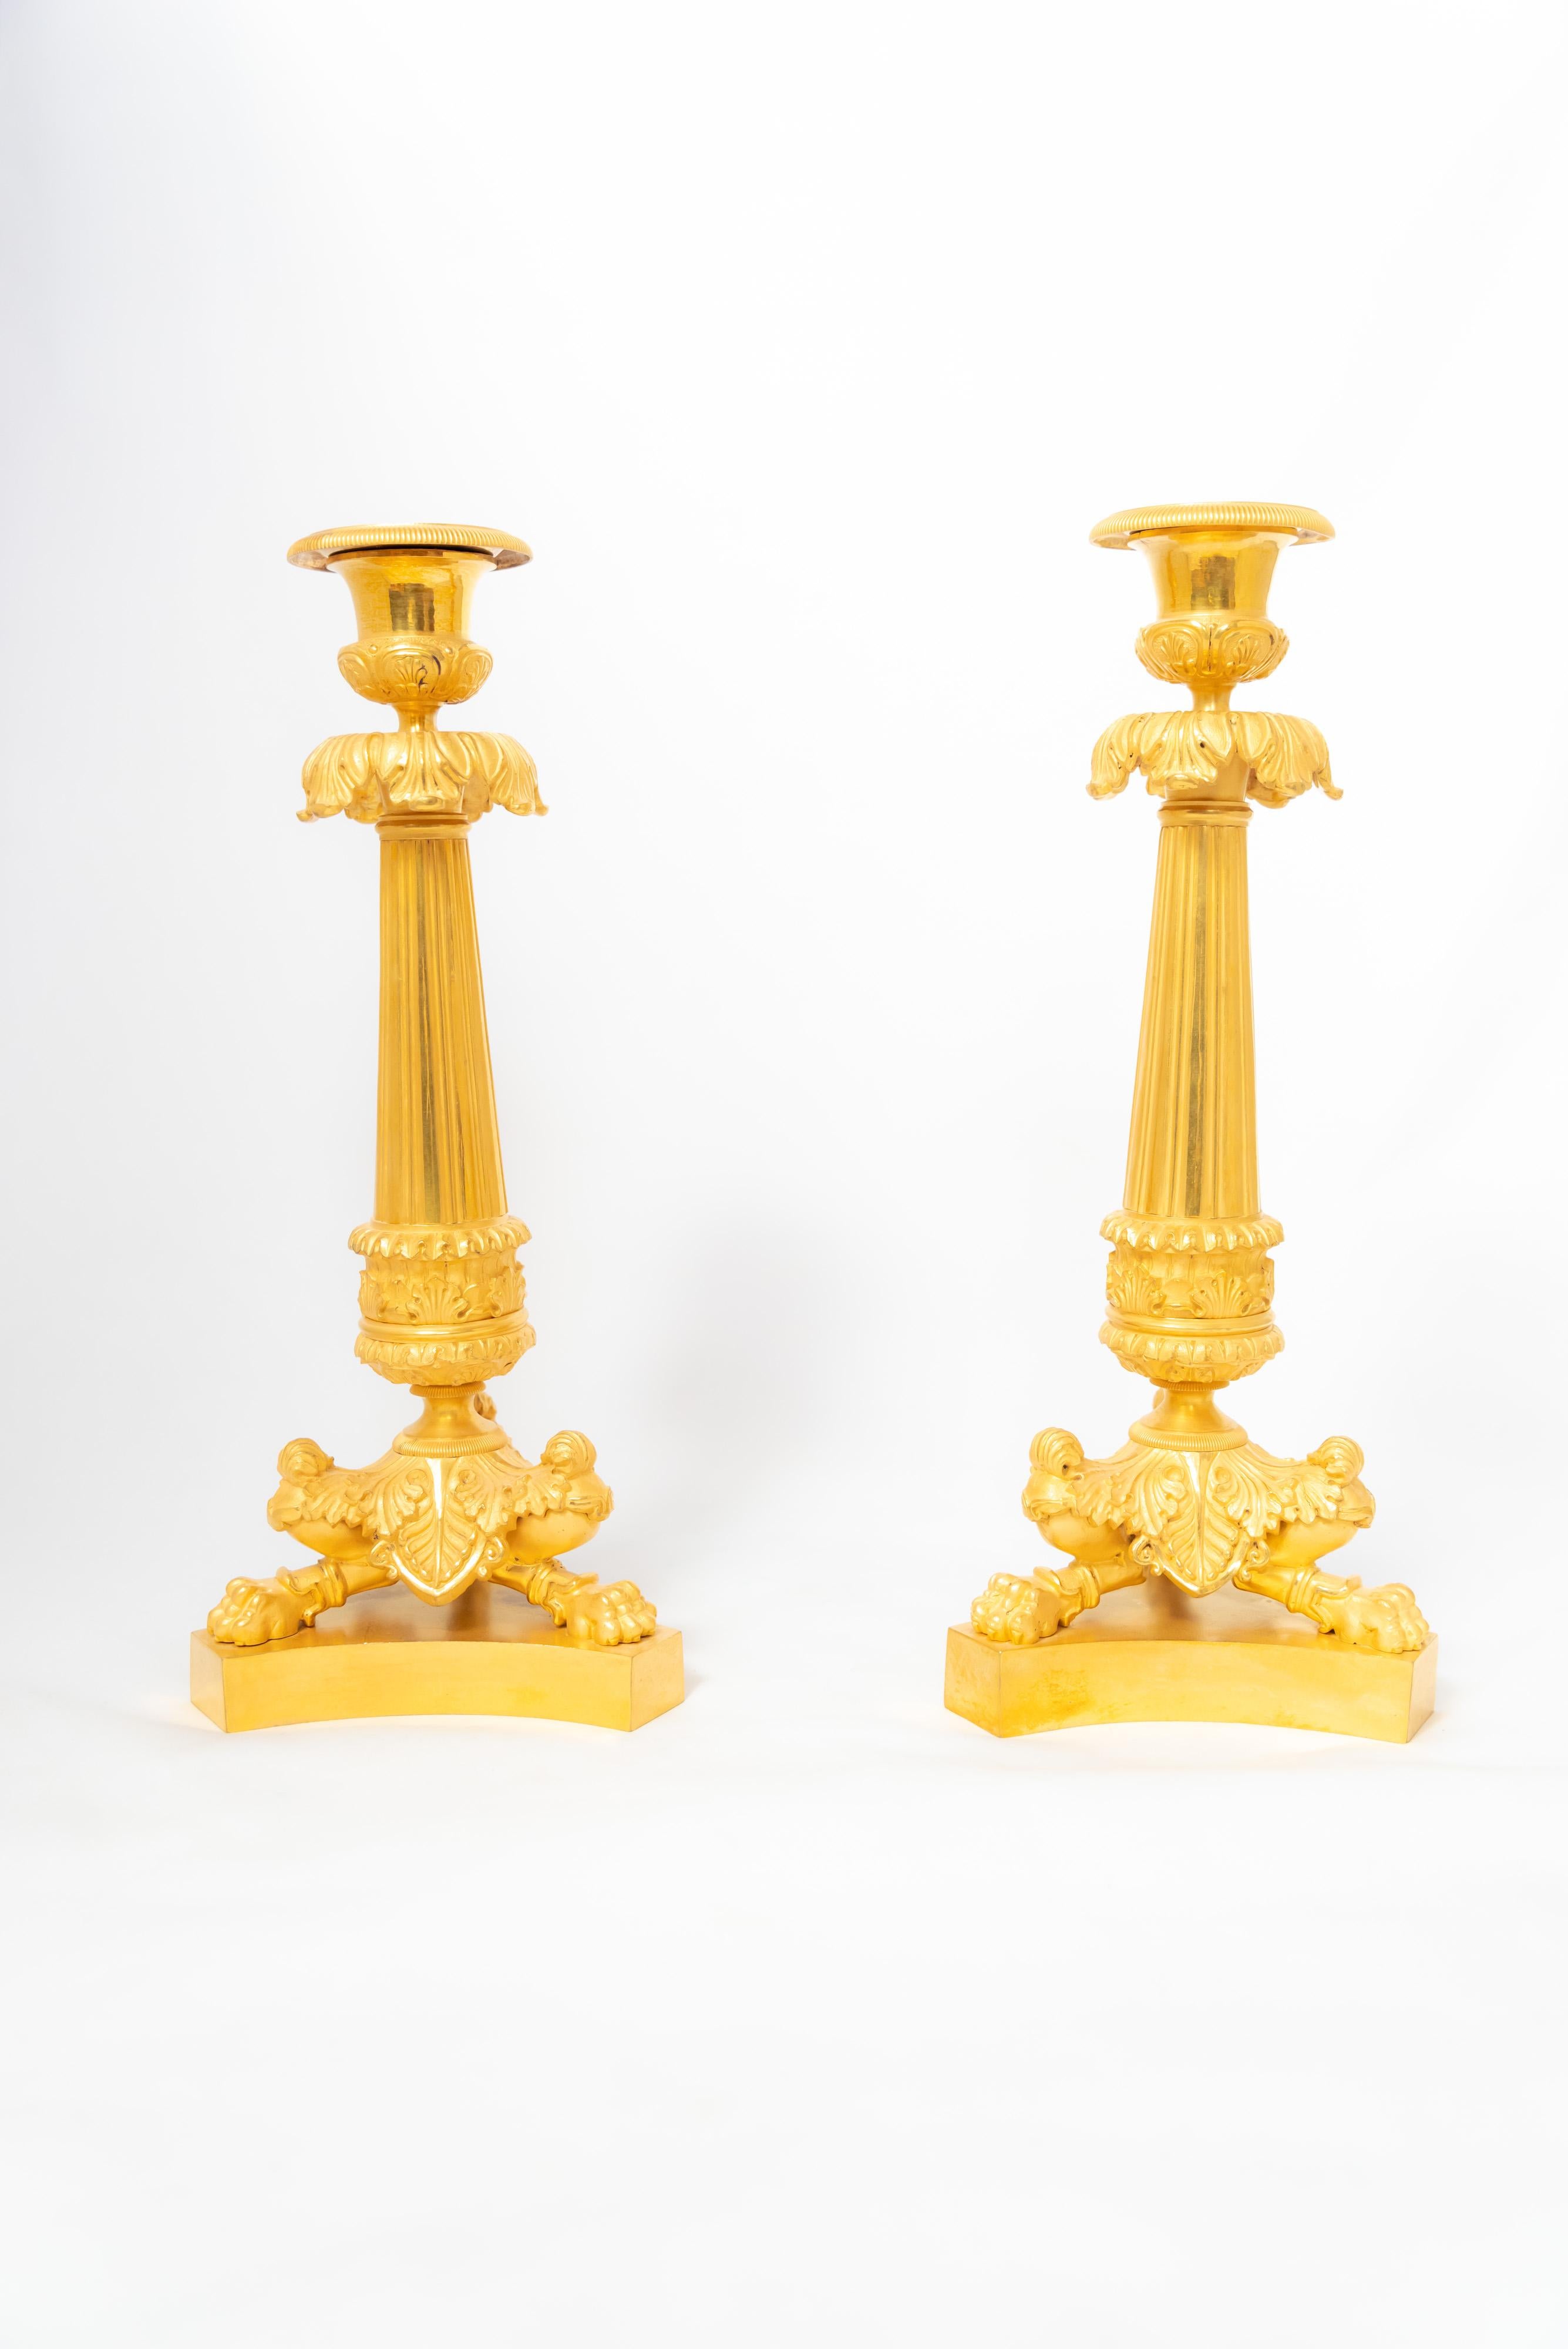 A pair of candlesticks in chiselled fire-gilt bronze from the French Empire or early Restauration Era. The pair, exemplifying the neoclassical iconography so popular in the Napoleonic Age, features a lion’s-paw-tripod base on a plinth complemented